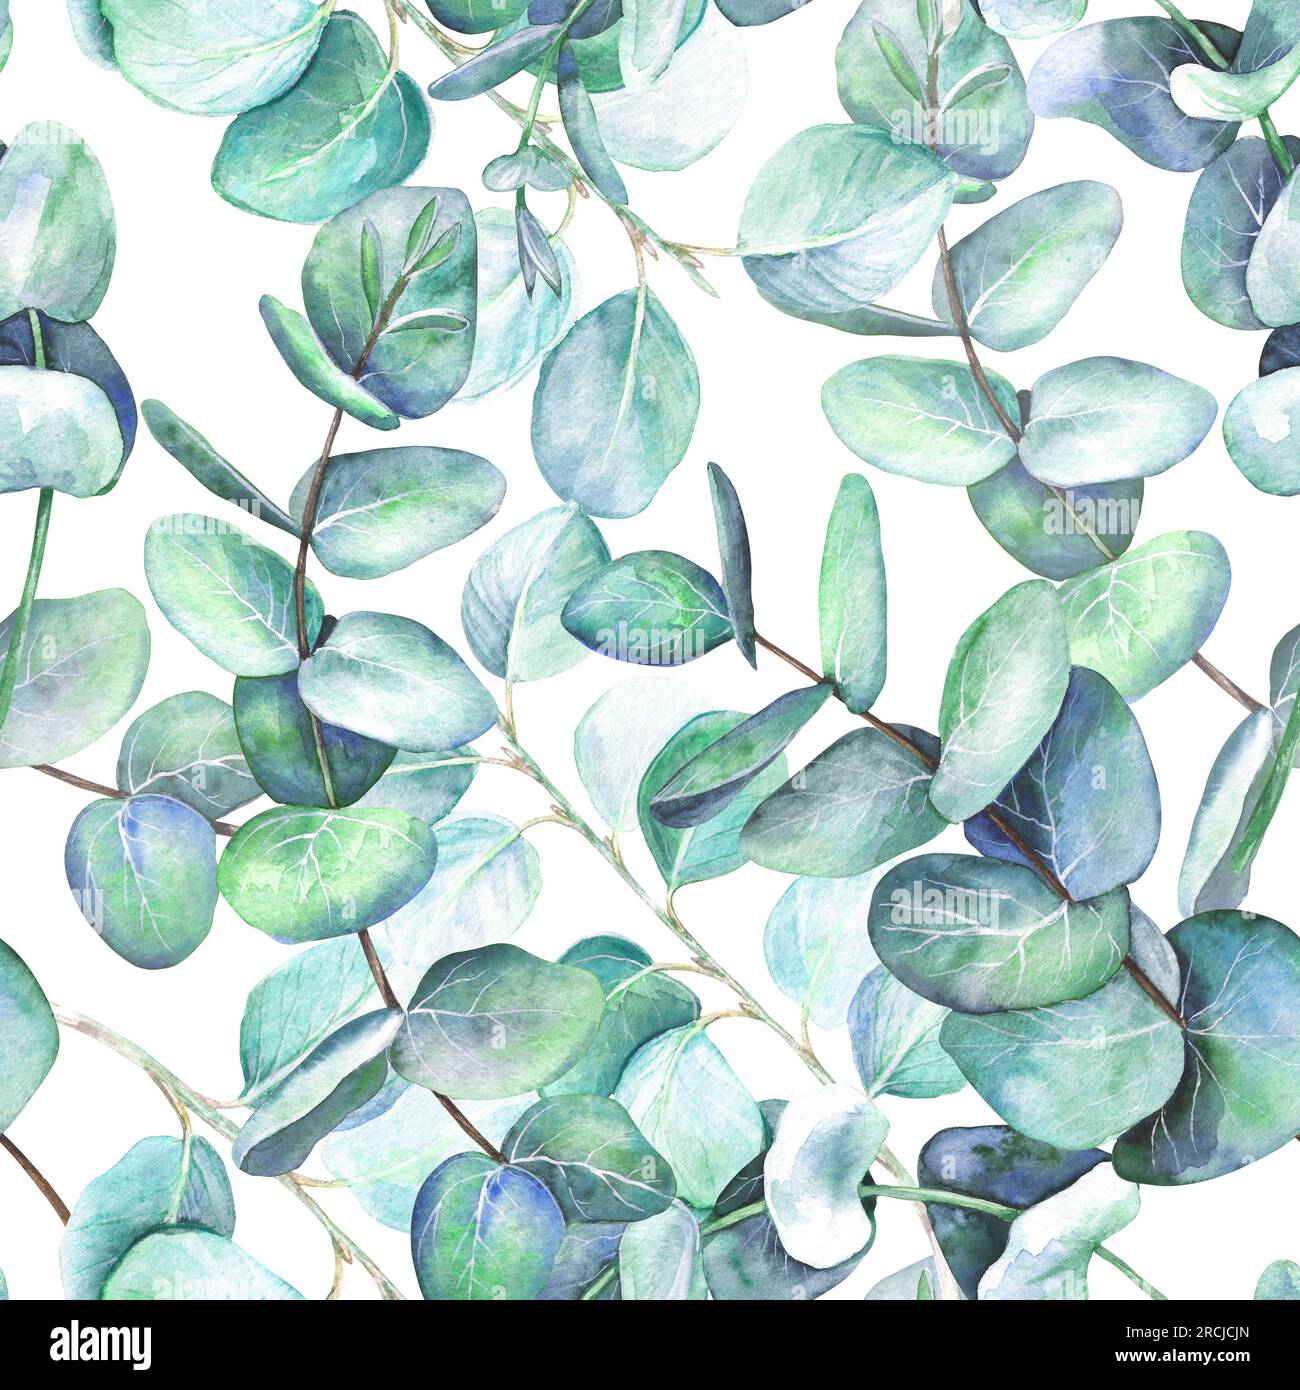 Seamless pattern from leaves of branches of eucalyptus. Watercolor illustration isolated on white background. The application is designed for printing Stock Photo